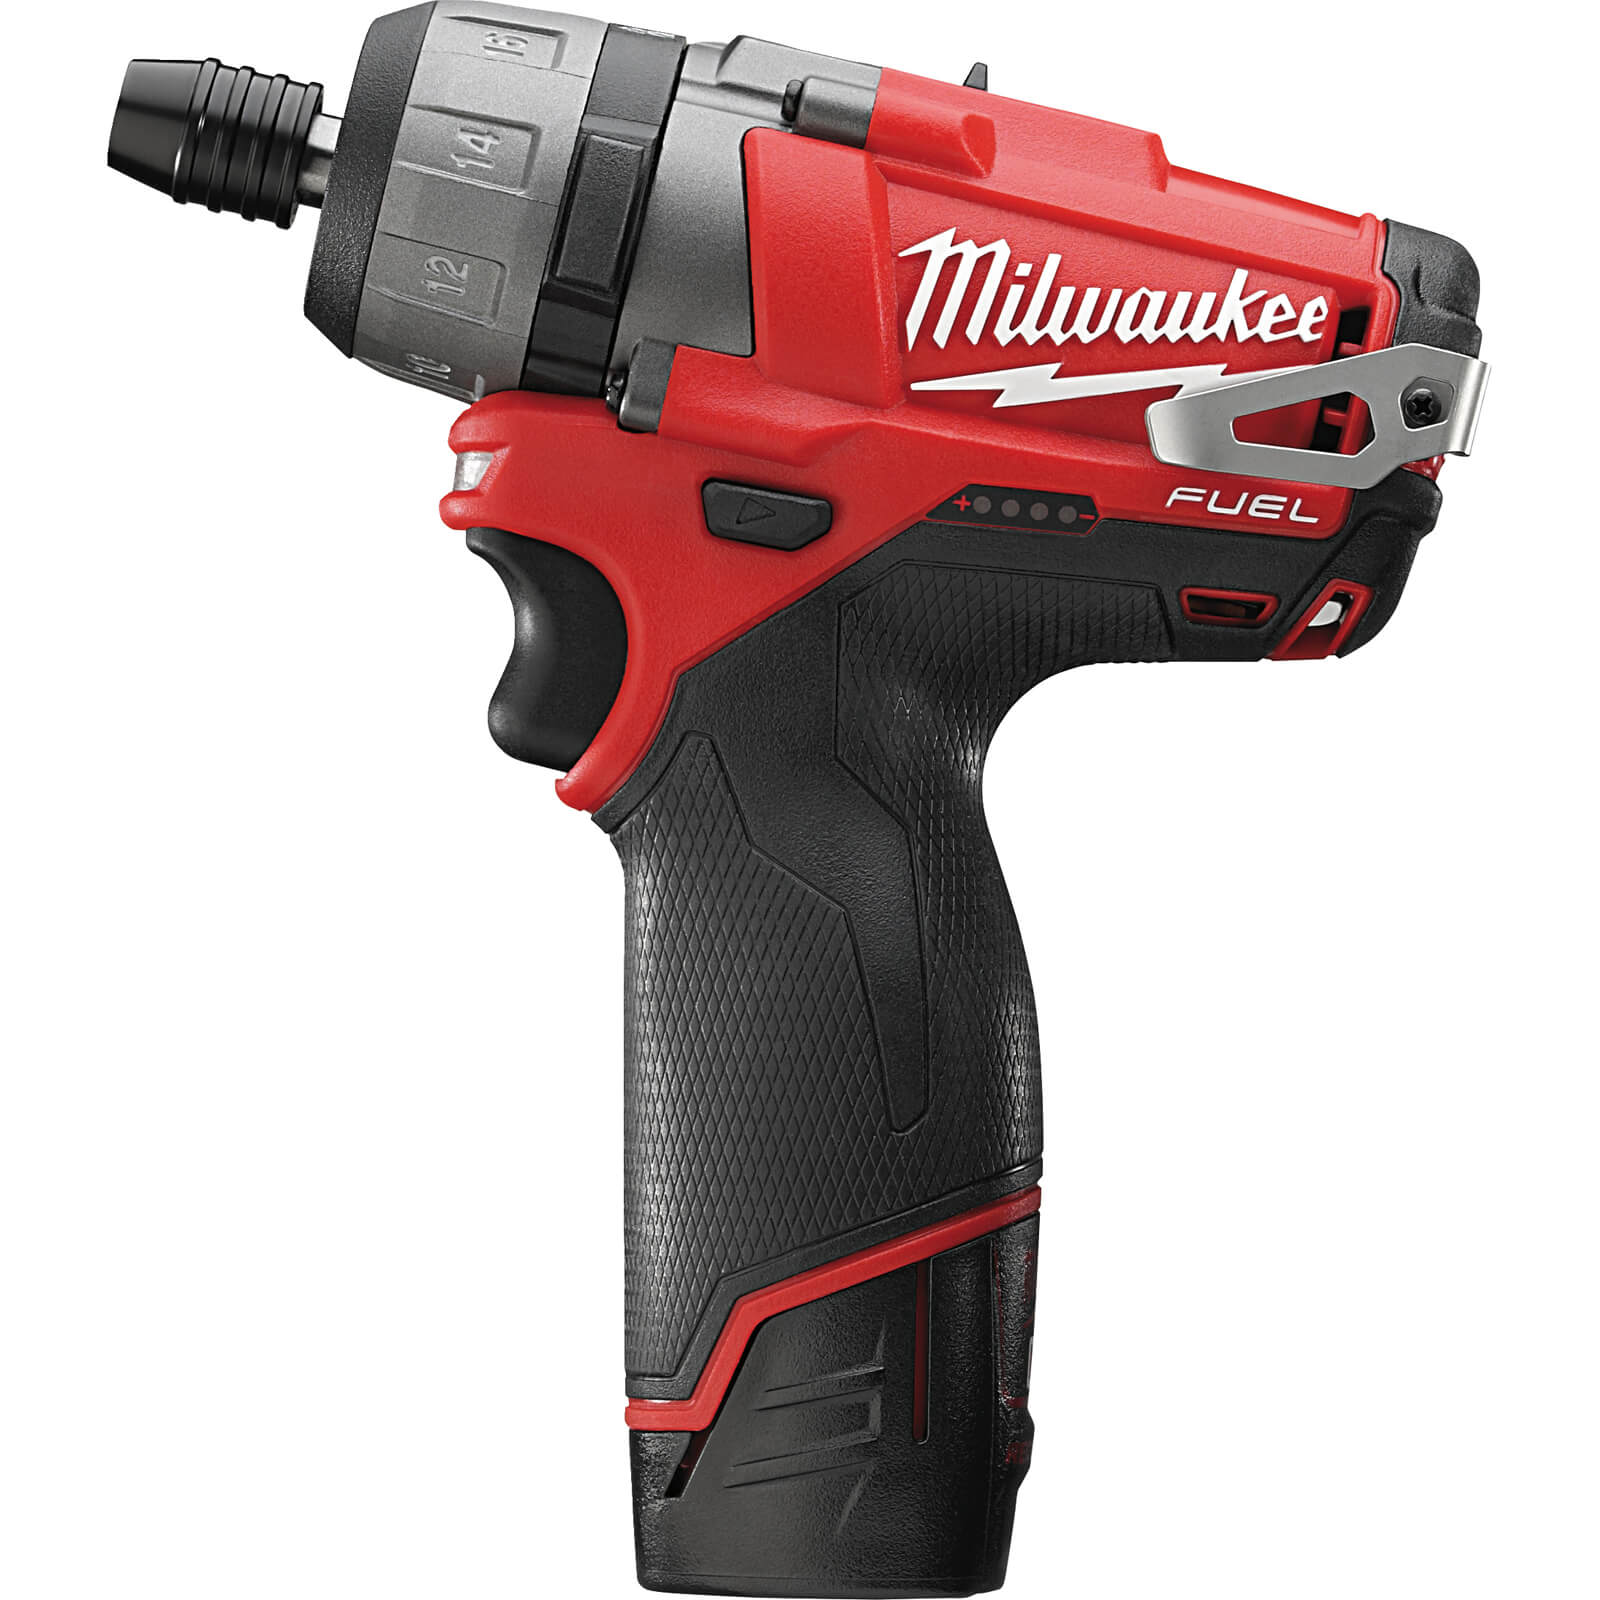 Image of Milwaukee M12 CD Fuel 12v Cordless Brushless Screwdriver 2 x 2ah Li-ion Charger Case